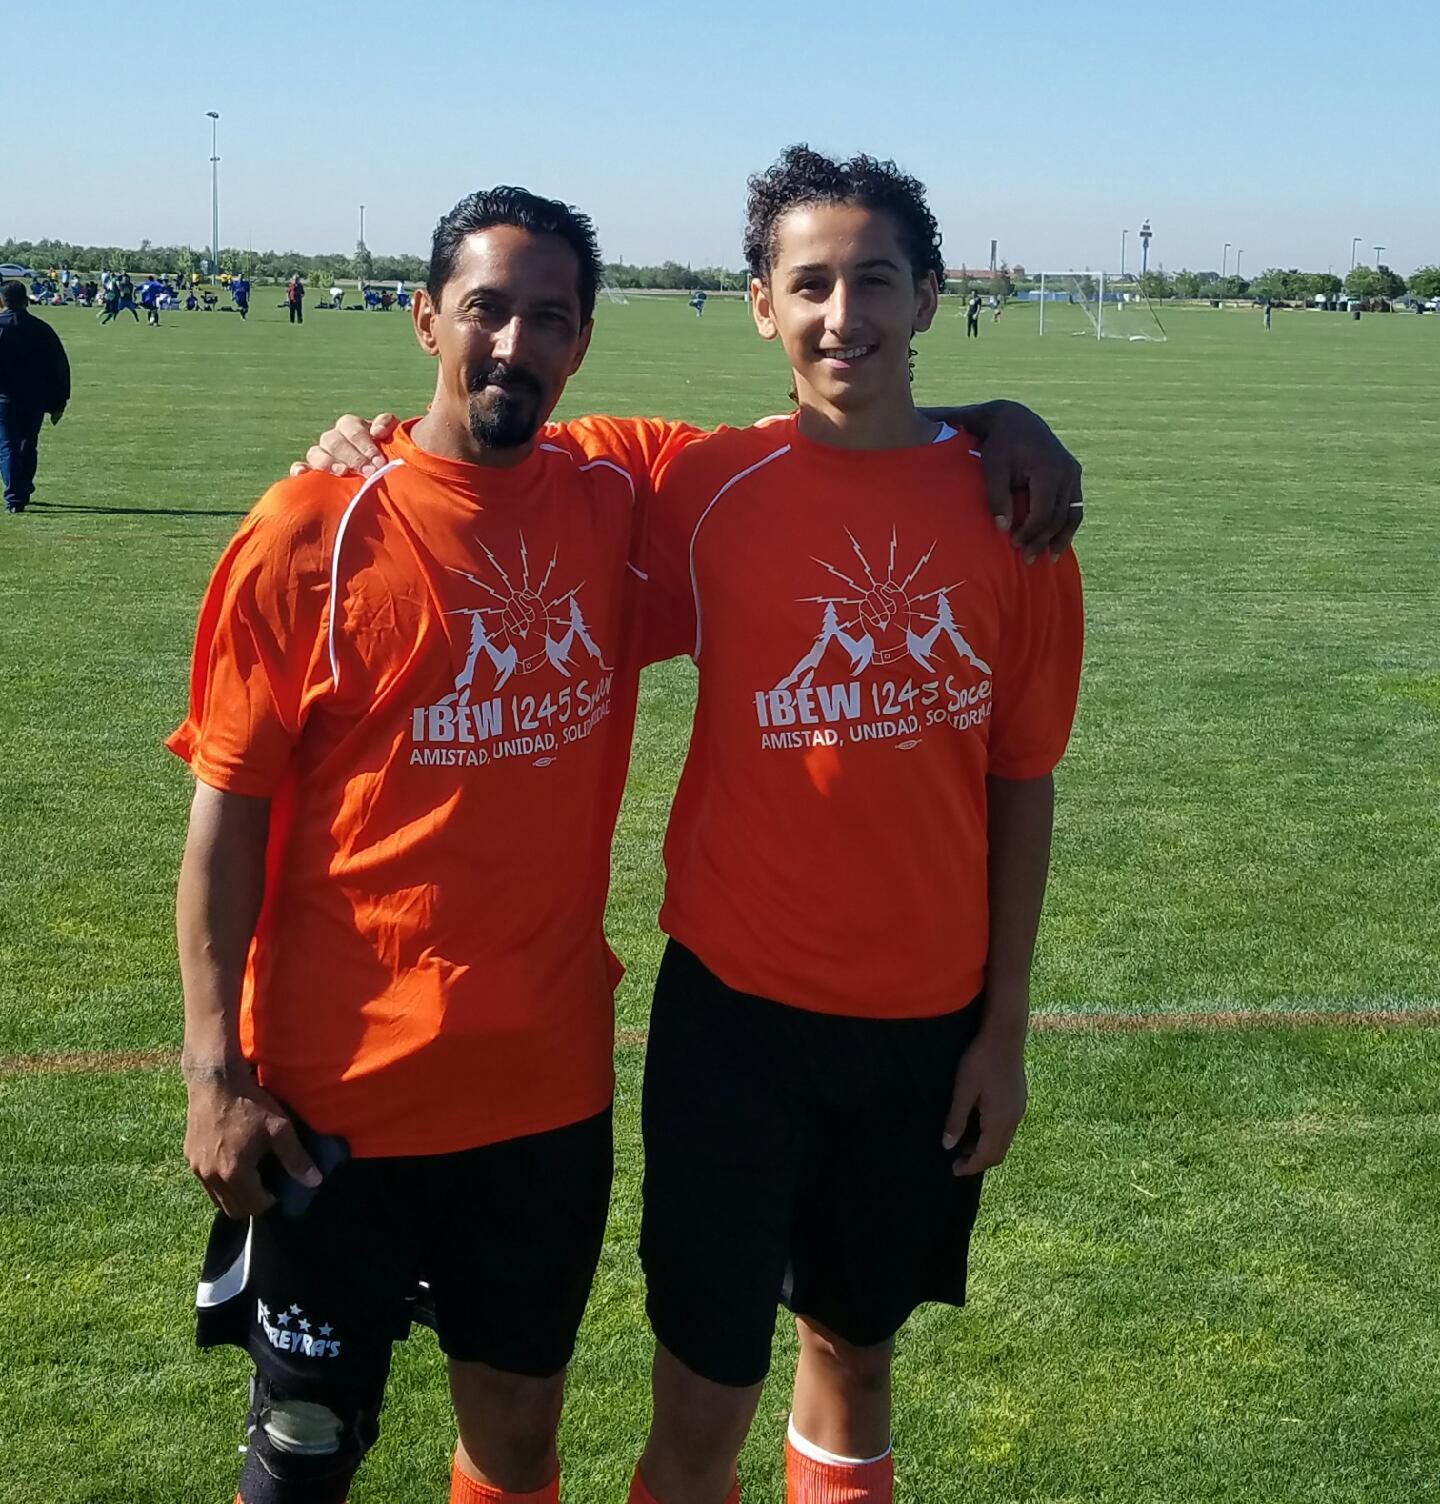 Jacinto Hernandez and his son Jonathan Hernandez played on the winning team from Stockton/Utility Tree